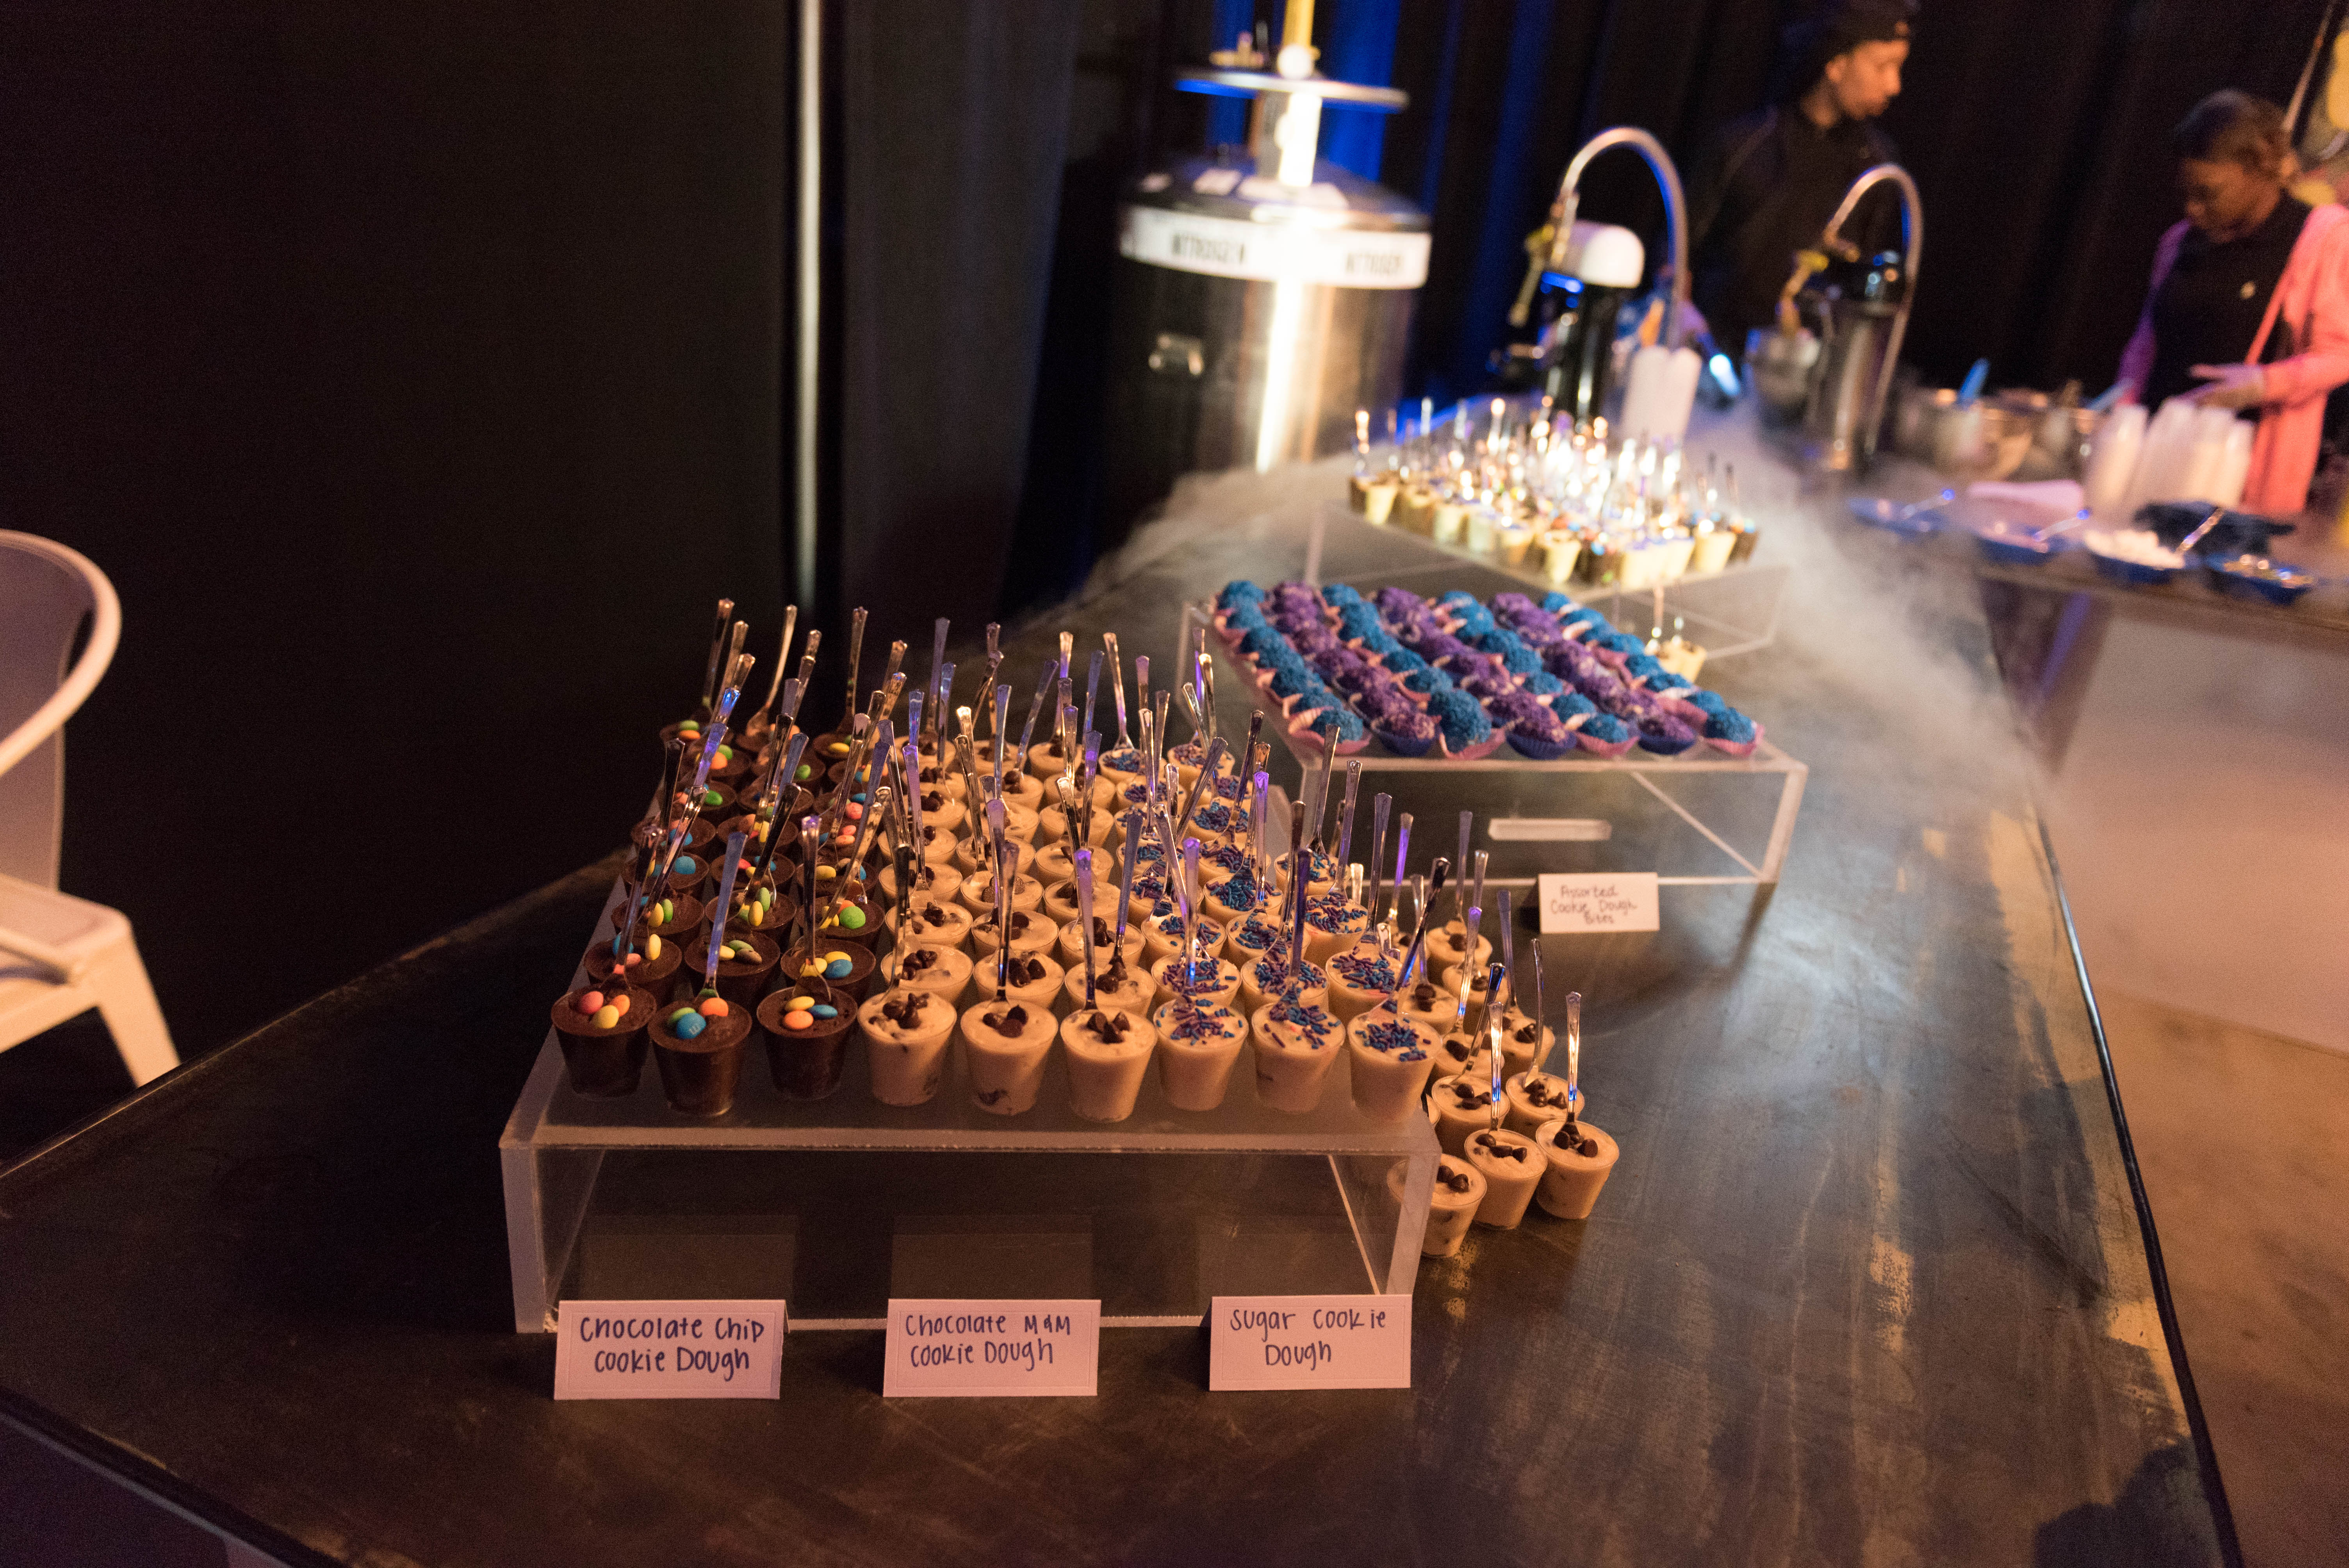 Cookie dough and liquid nitrogen ice cream at midnight blue and lavender urban lounge and club-themed B'nai Mitzvah party for twins in Beltsville, Maryland | Pop Color Events | Adding a Pop of Color to Bar and Bat Mitzvahs in DC, MD & VA